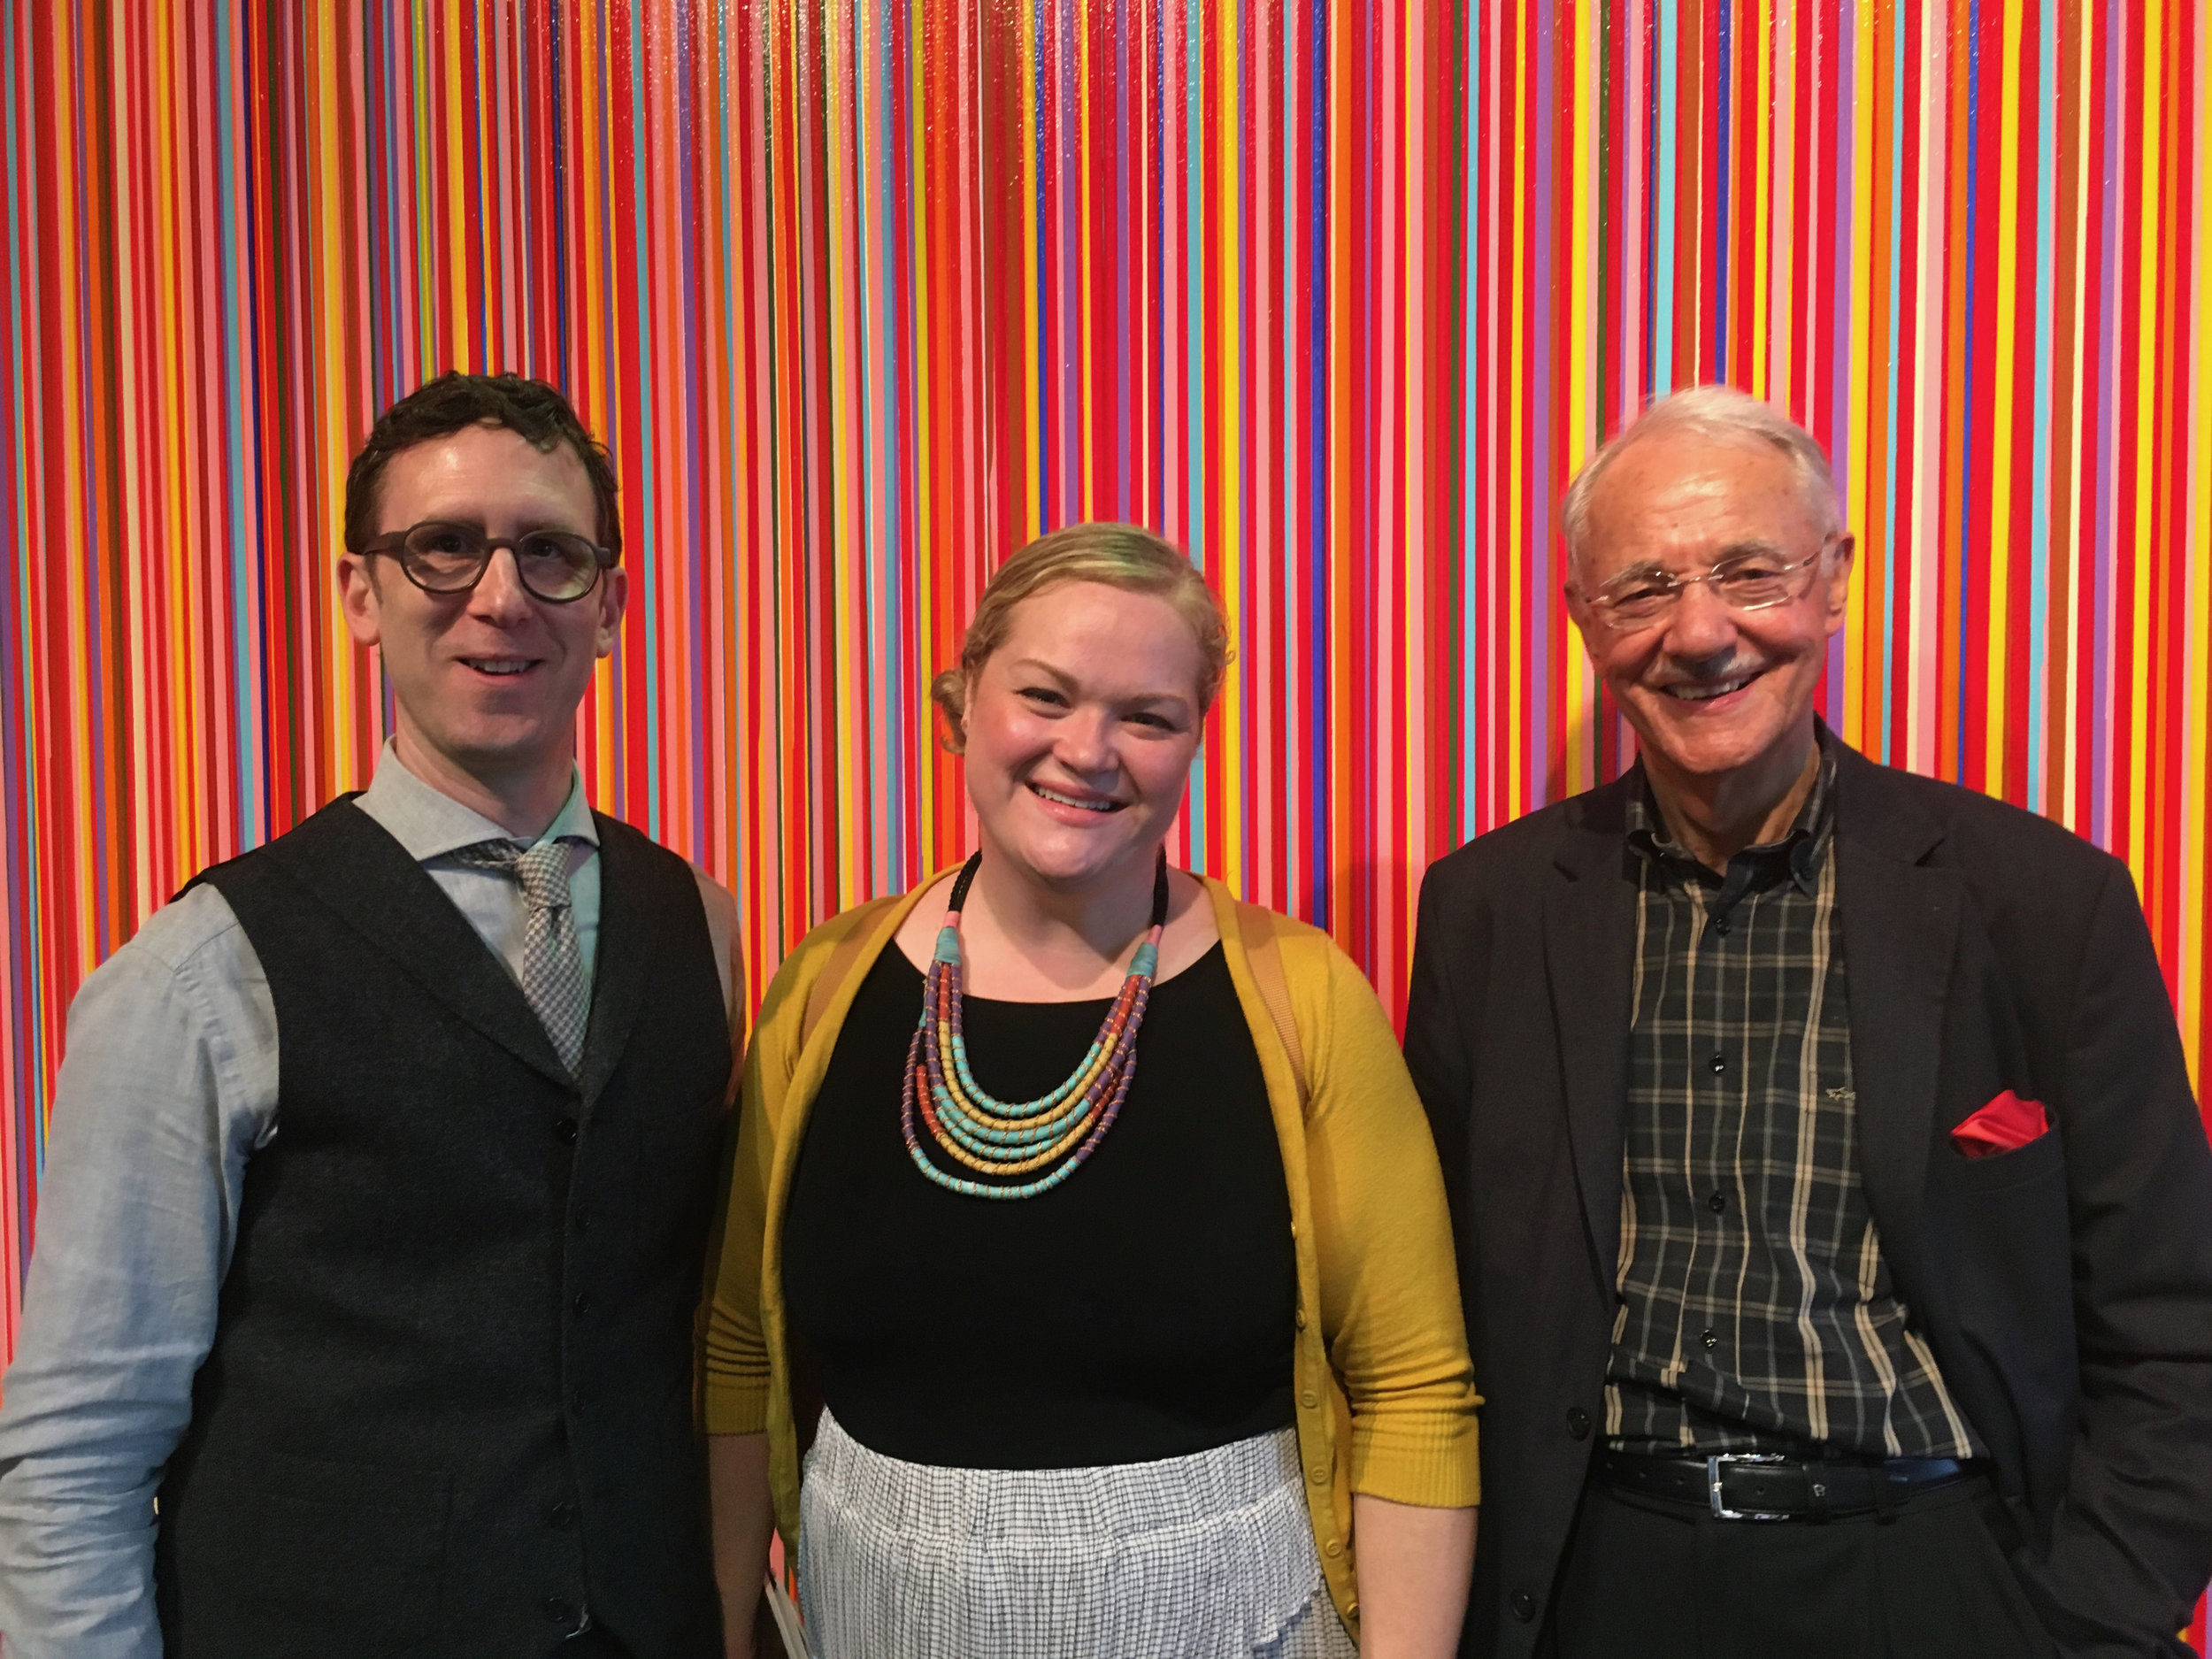  John Silvis, WSJ journalist Kelly Crow Hayes and Mr. Karlheinz Essl at The Armory Show NY Pier 92. Background: Work on canvas by Jun Kaneko 